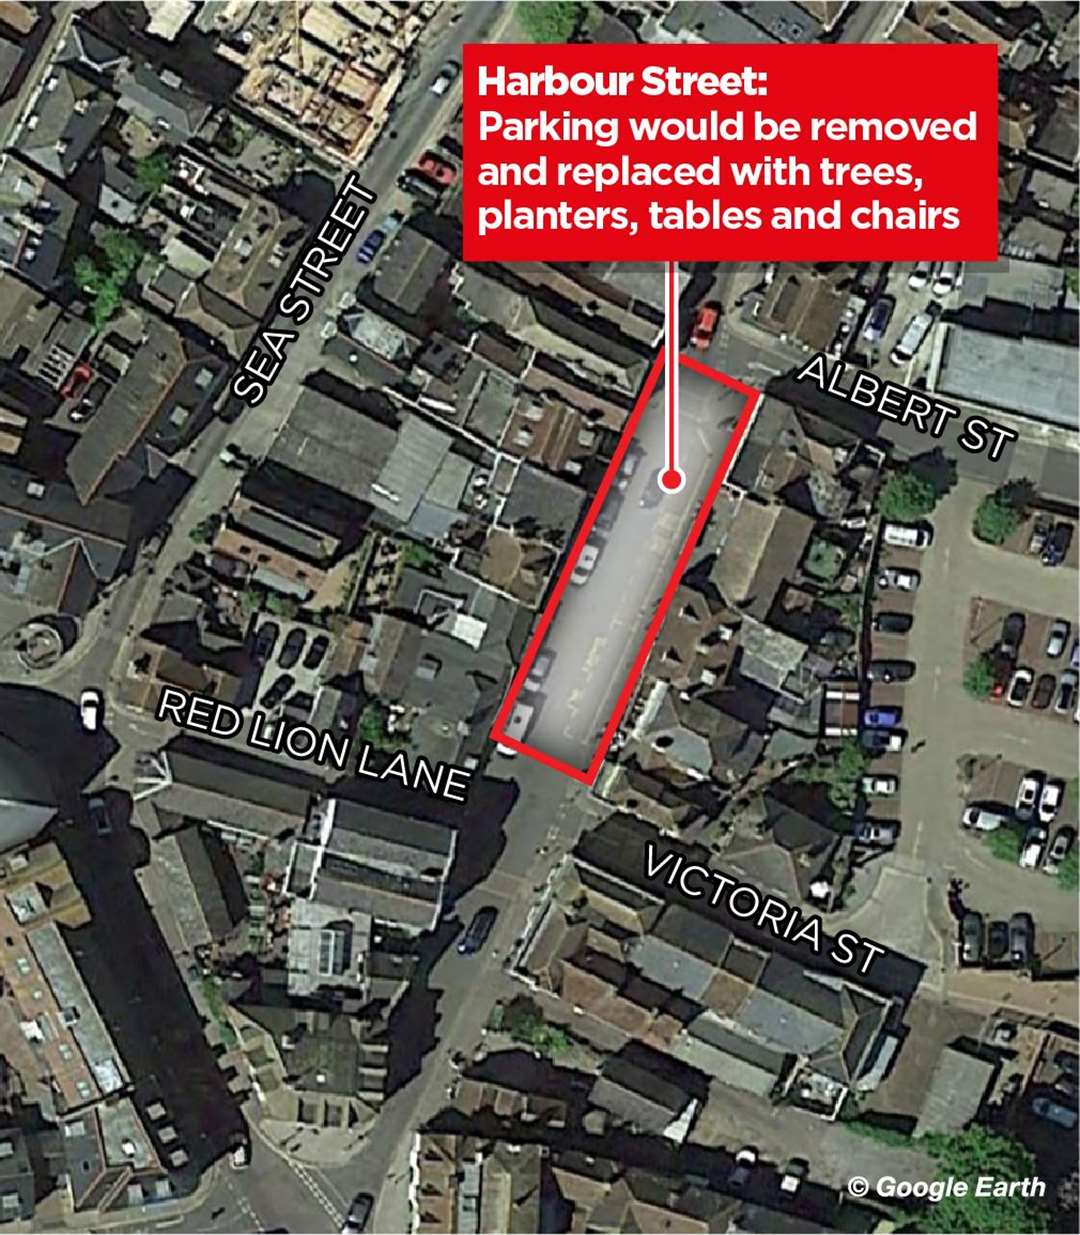 The area of Harbour Street where Arne Karlsen wants to replace parking